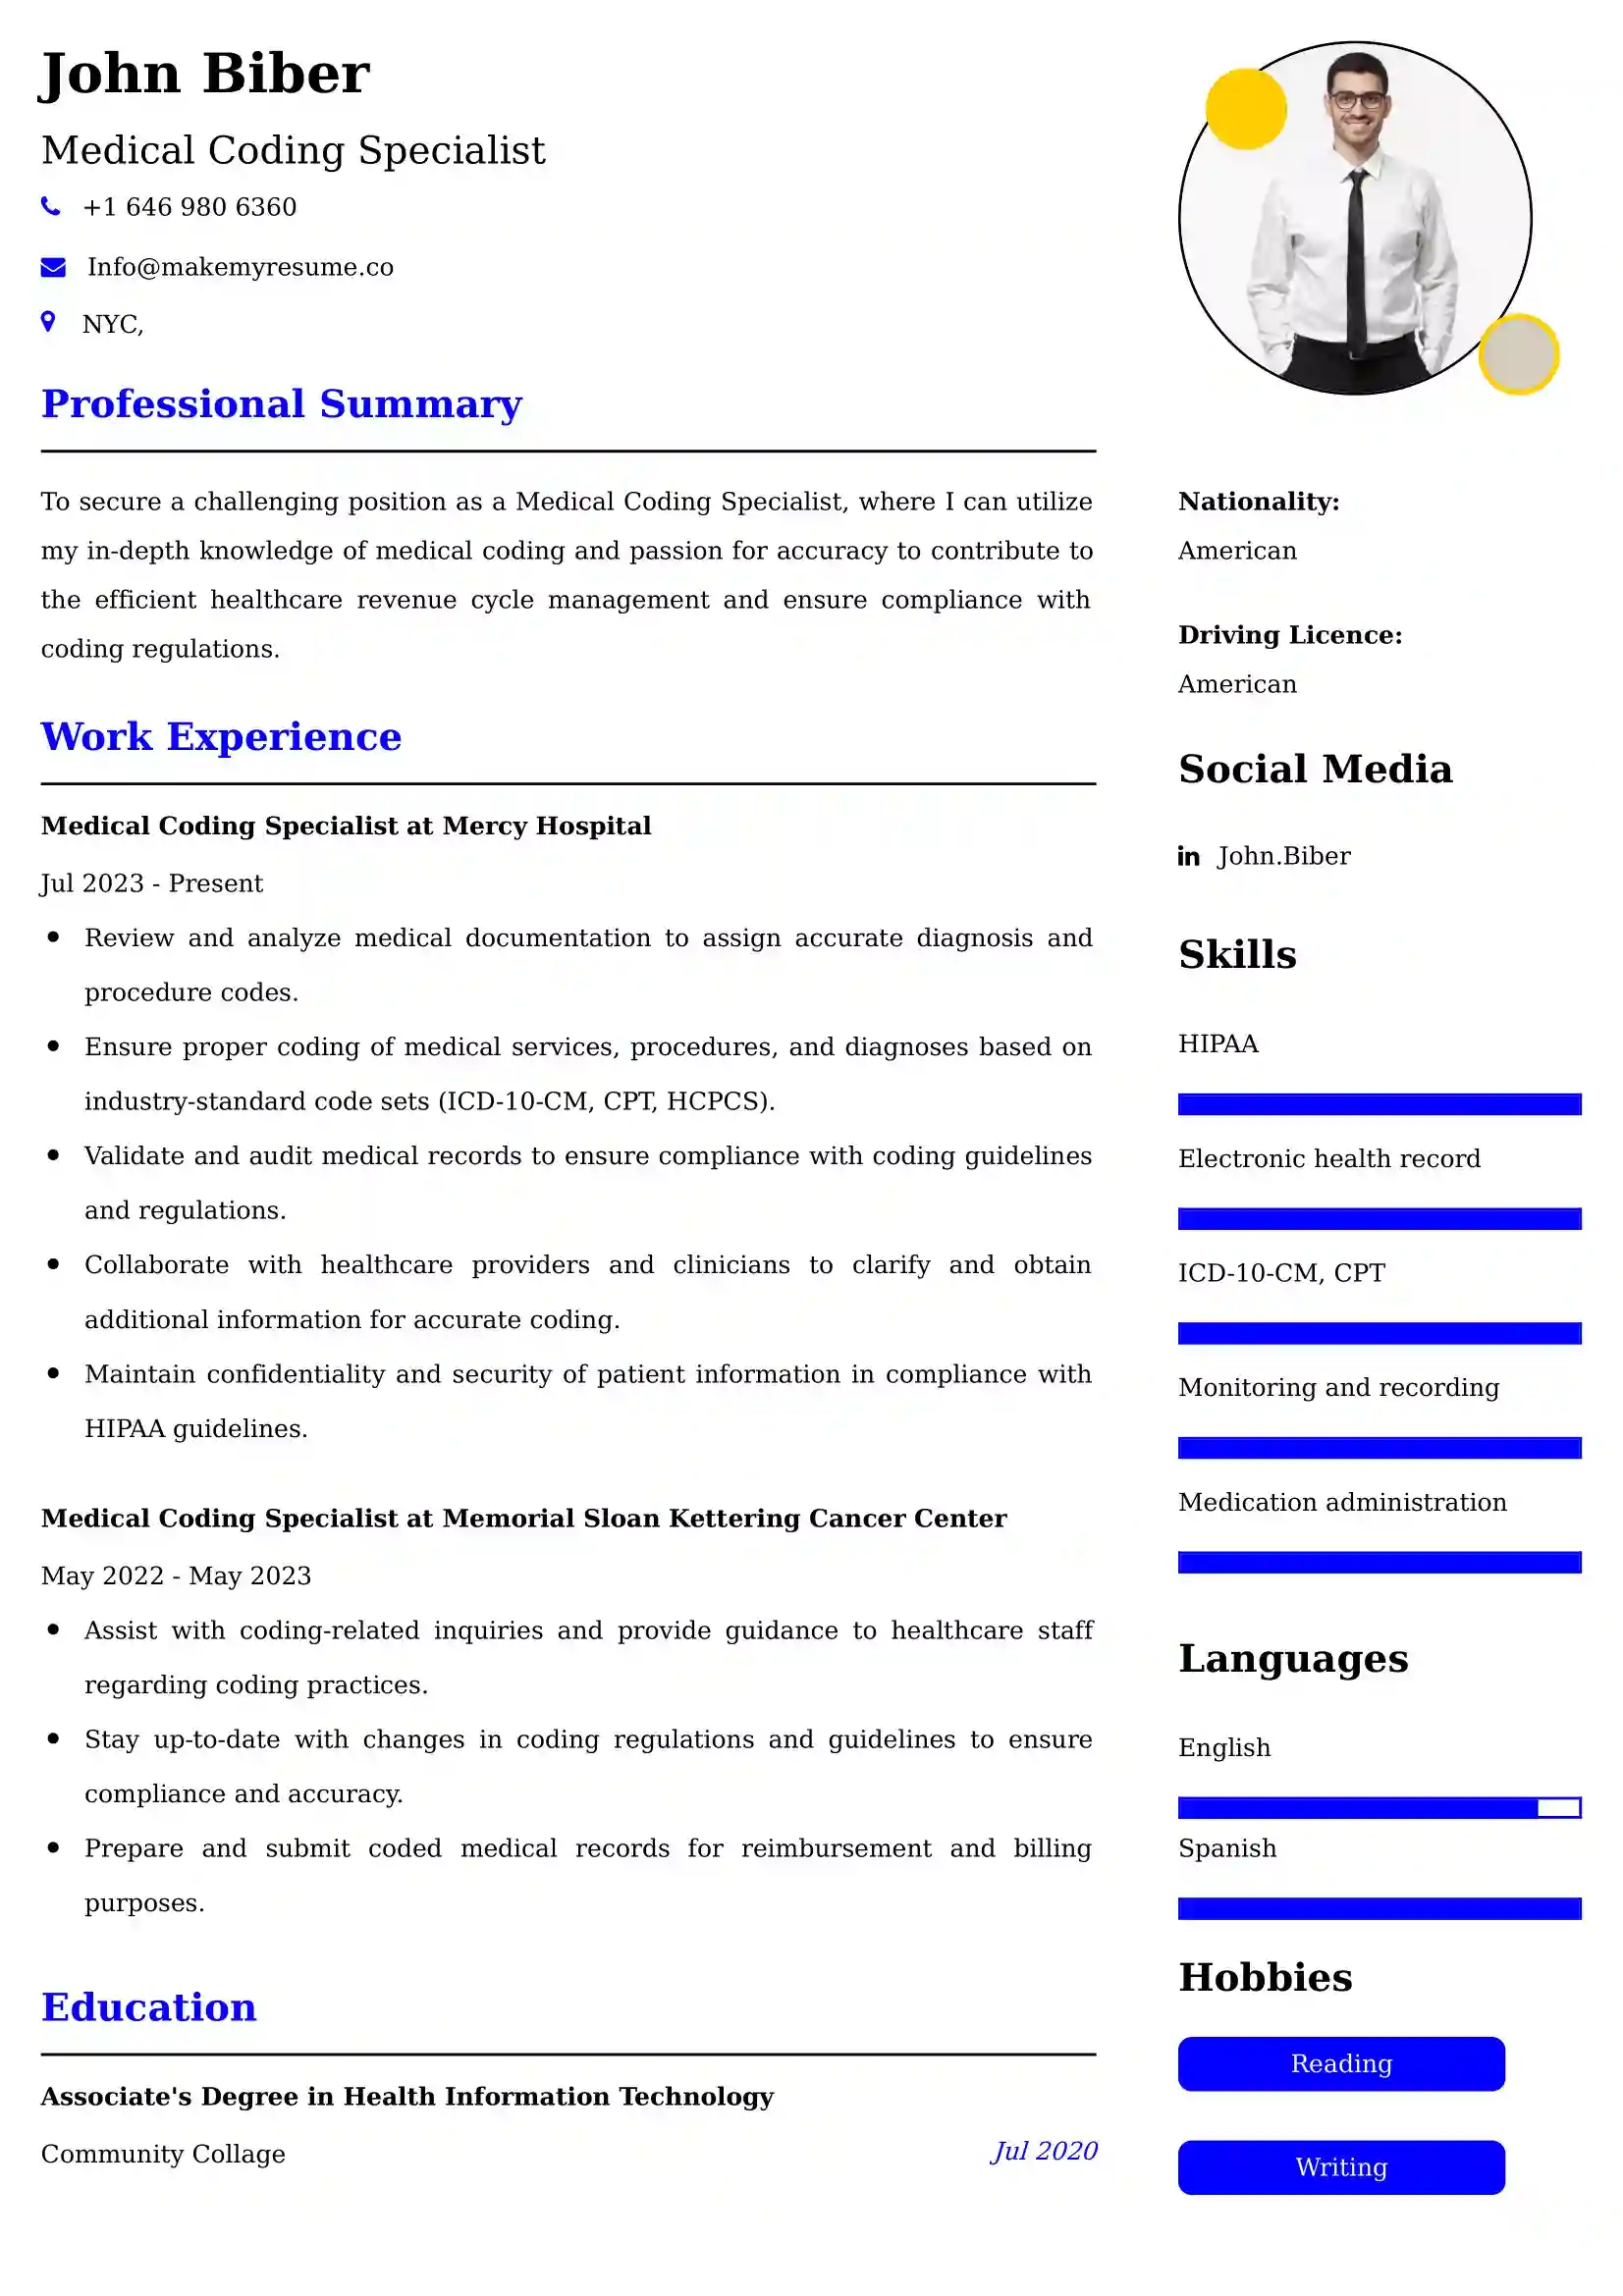 Medical Coding Specialist Resume Examples - UK Format, Latest Template.